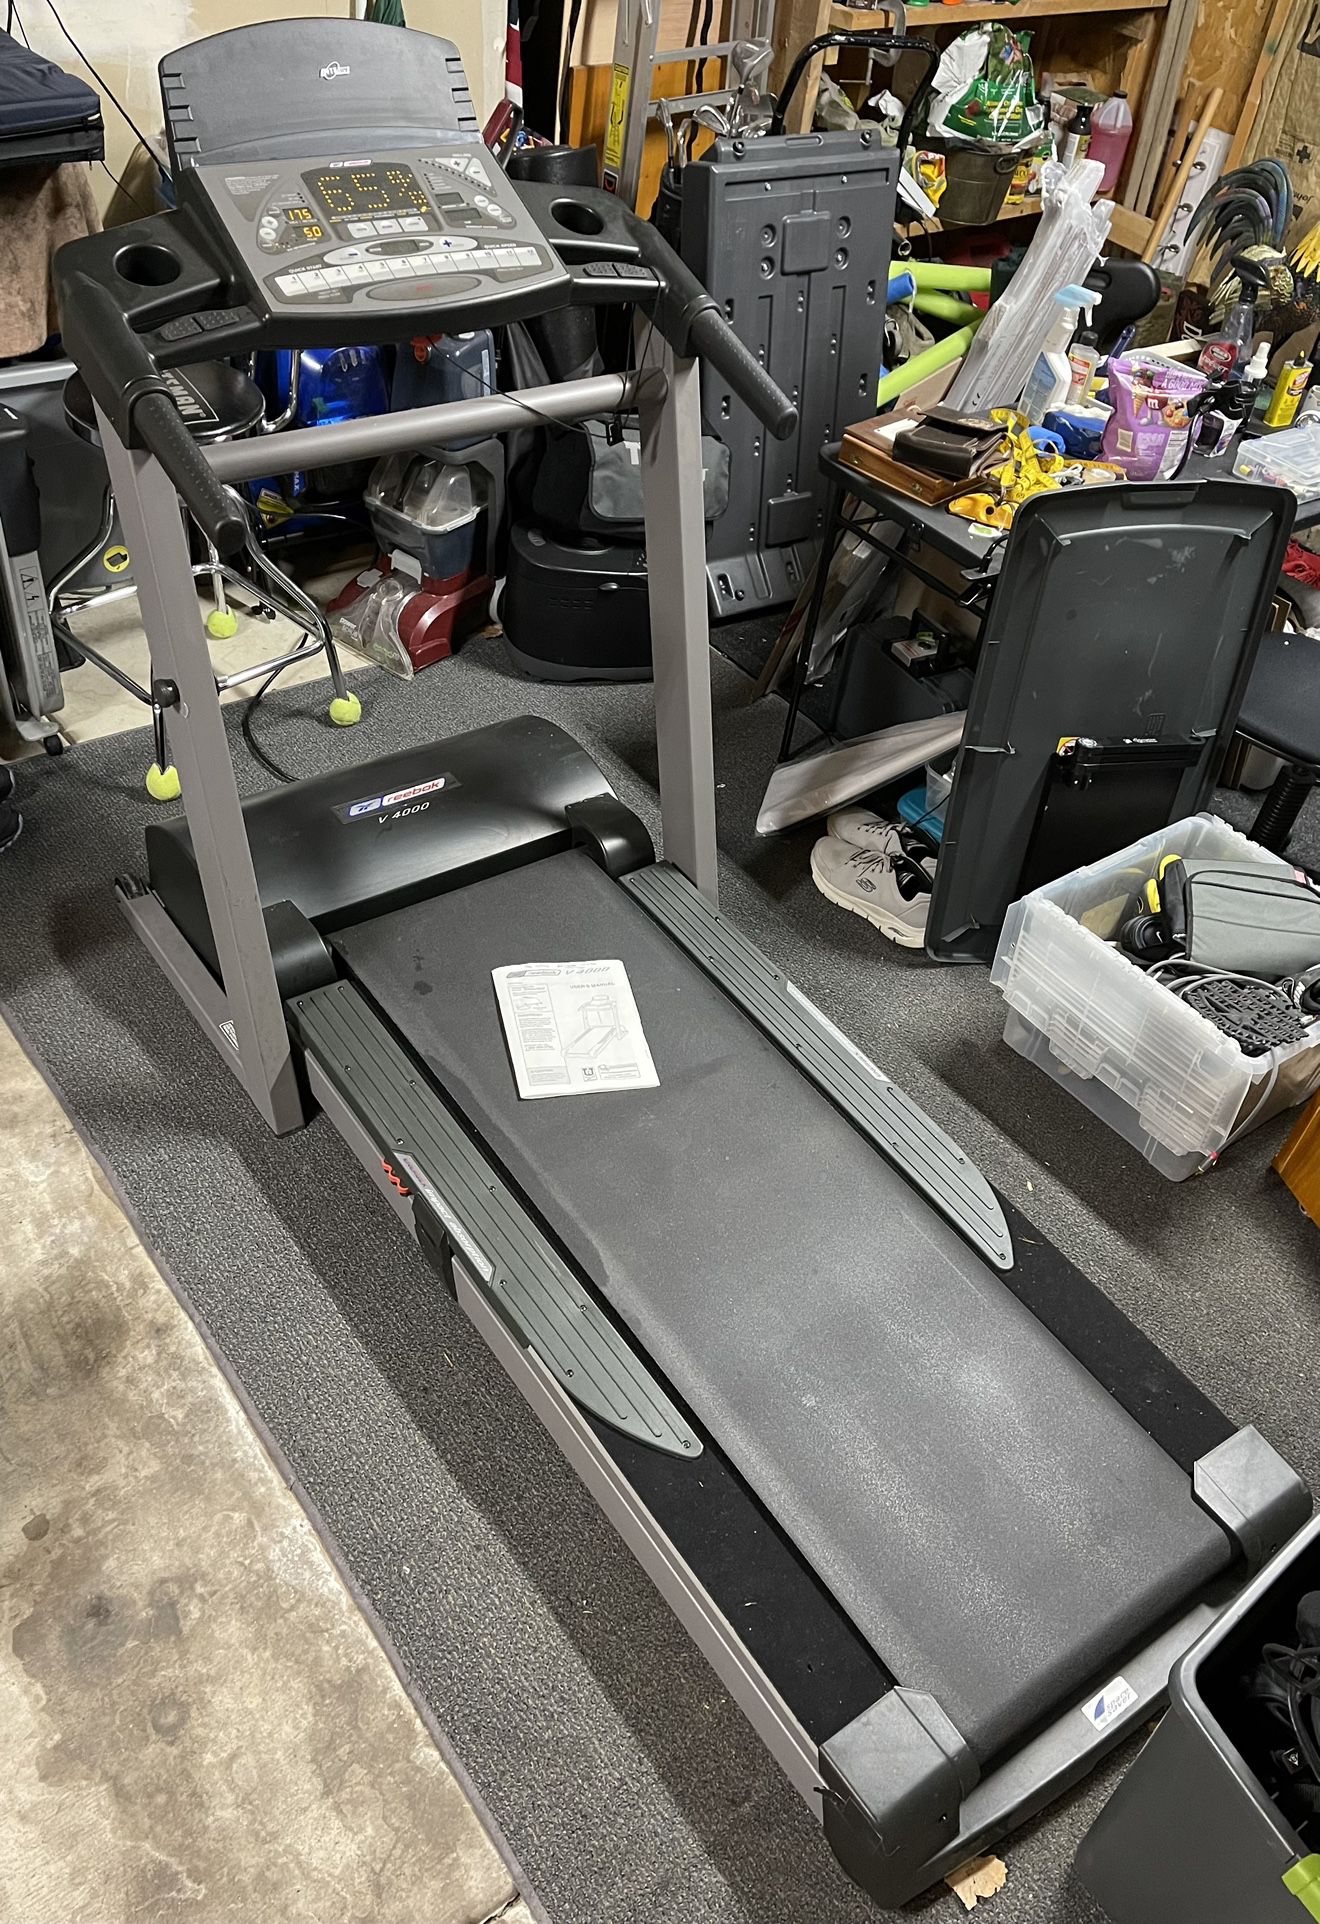 Treadmill - Reebok V4000 - Great Condition! ( First Come First Serve)